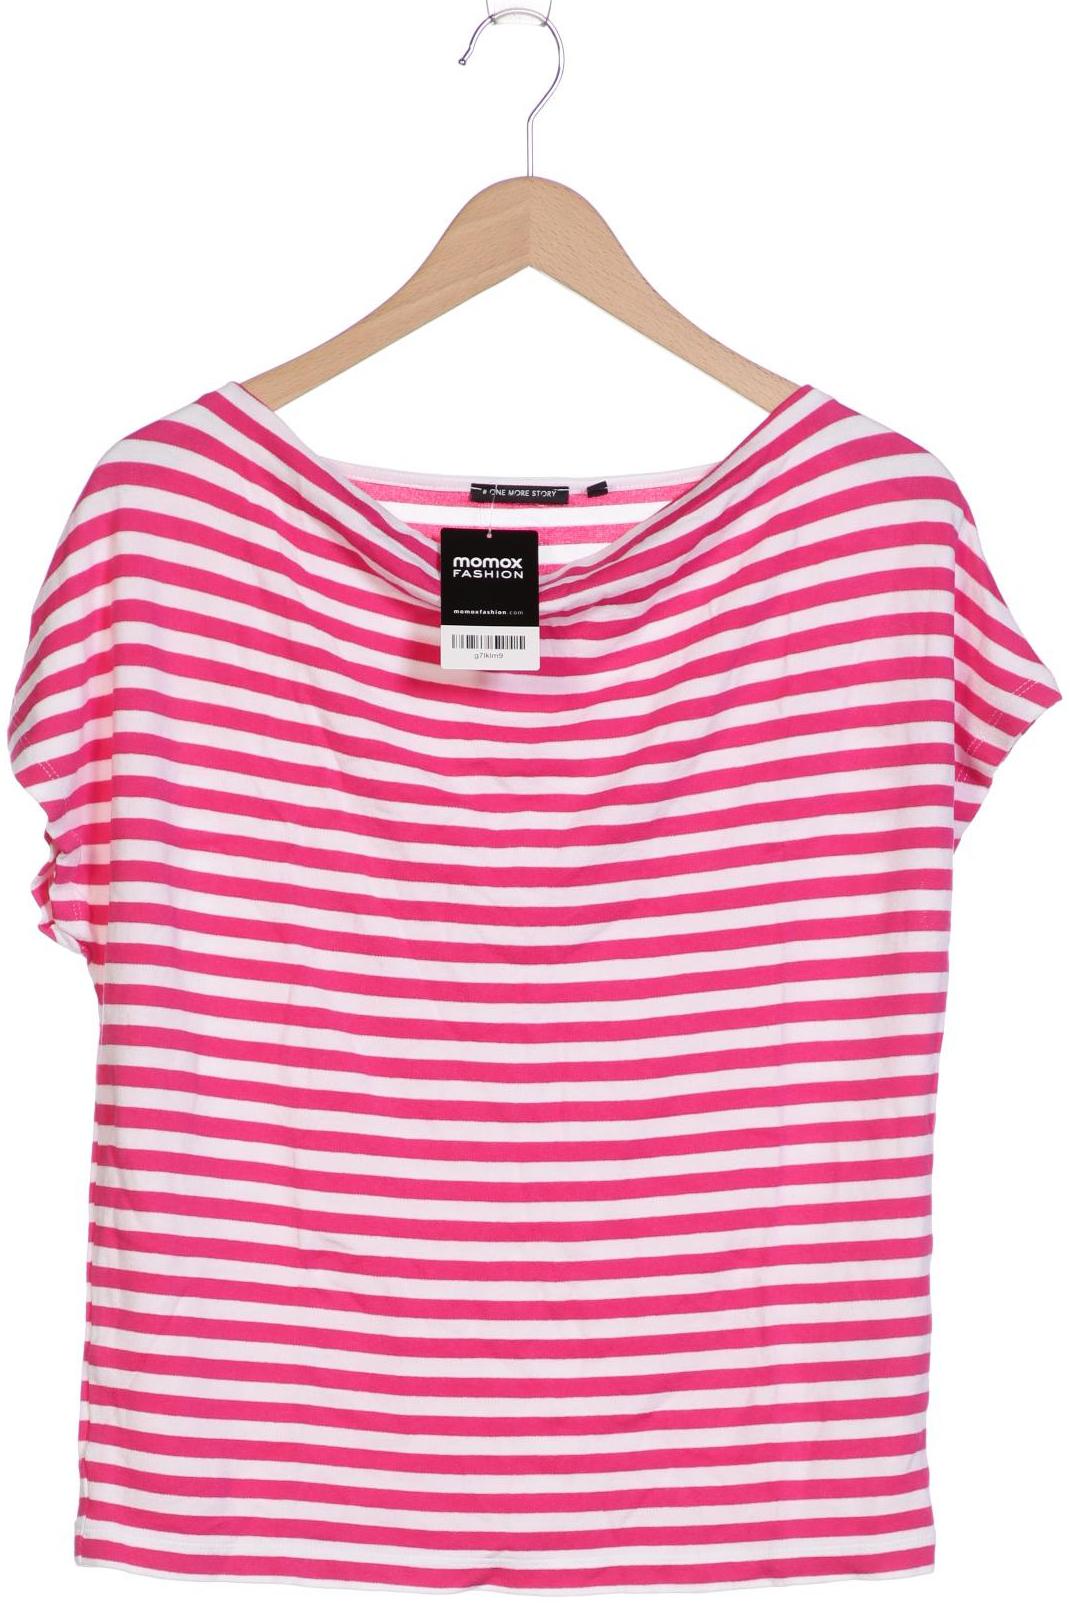 ONE More Story Damen T-Shirt, pink, Gr. 34 von ONE MORE STORY